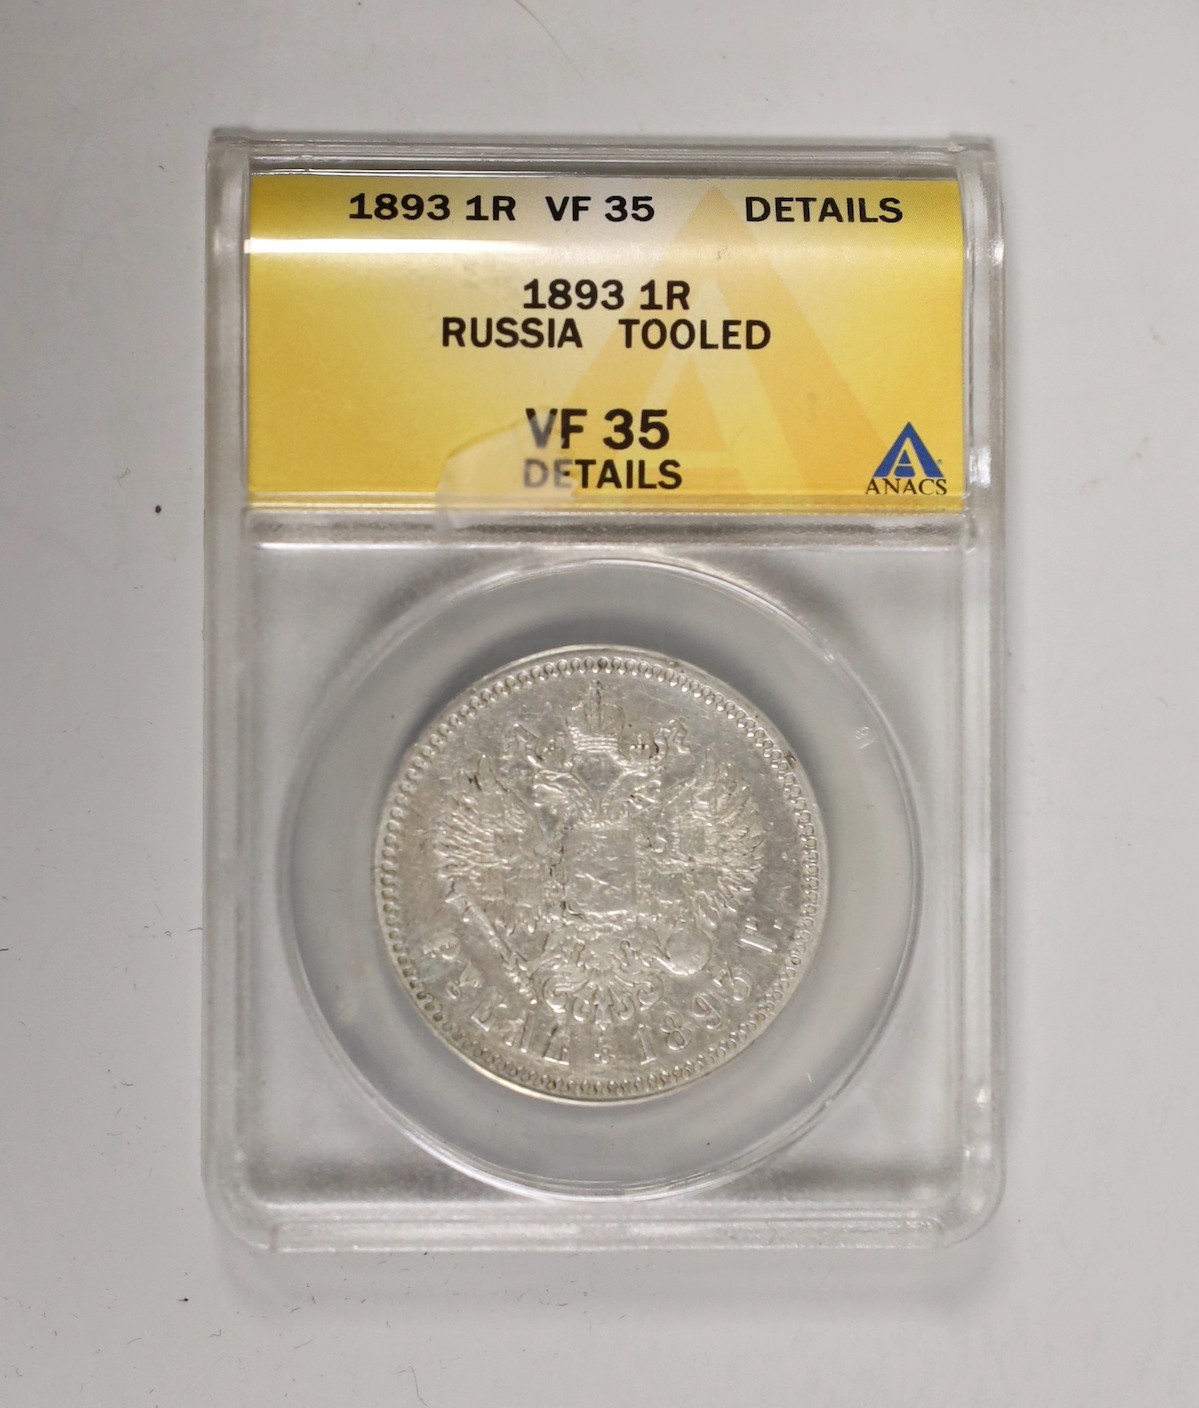 Russia coins, Alexander III 1 rouble 1893, ANACS slabbed and graded VF35                                                                                                                                                    